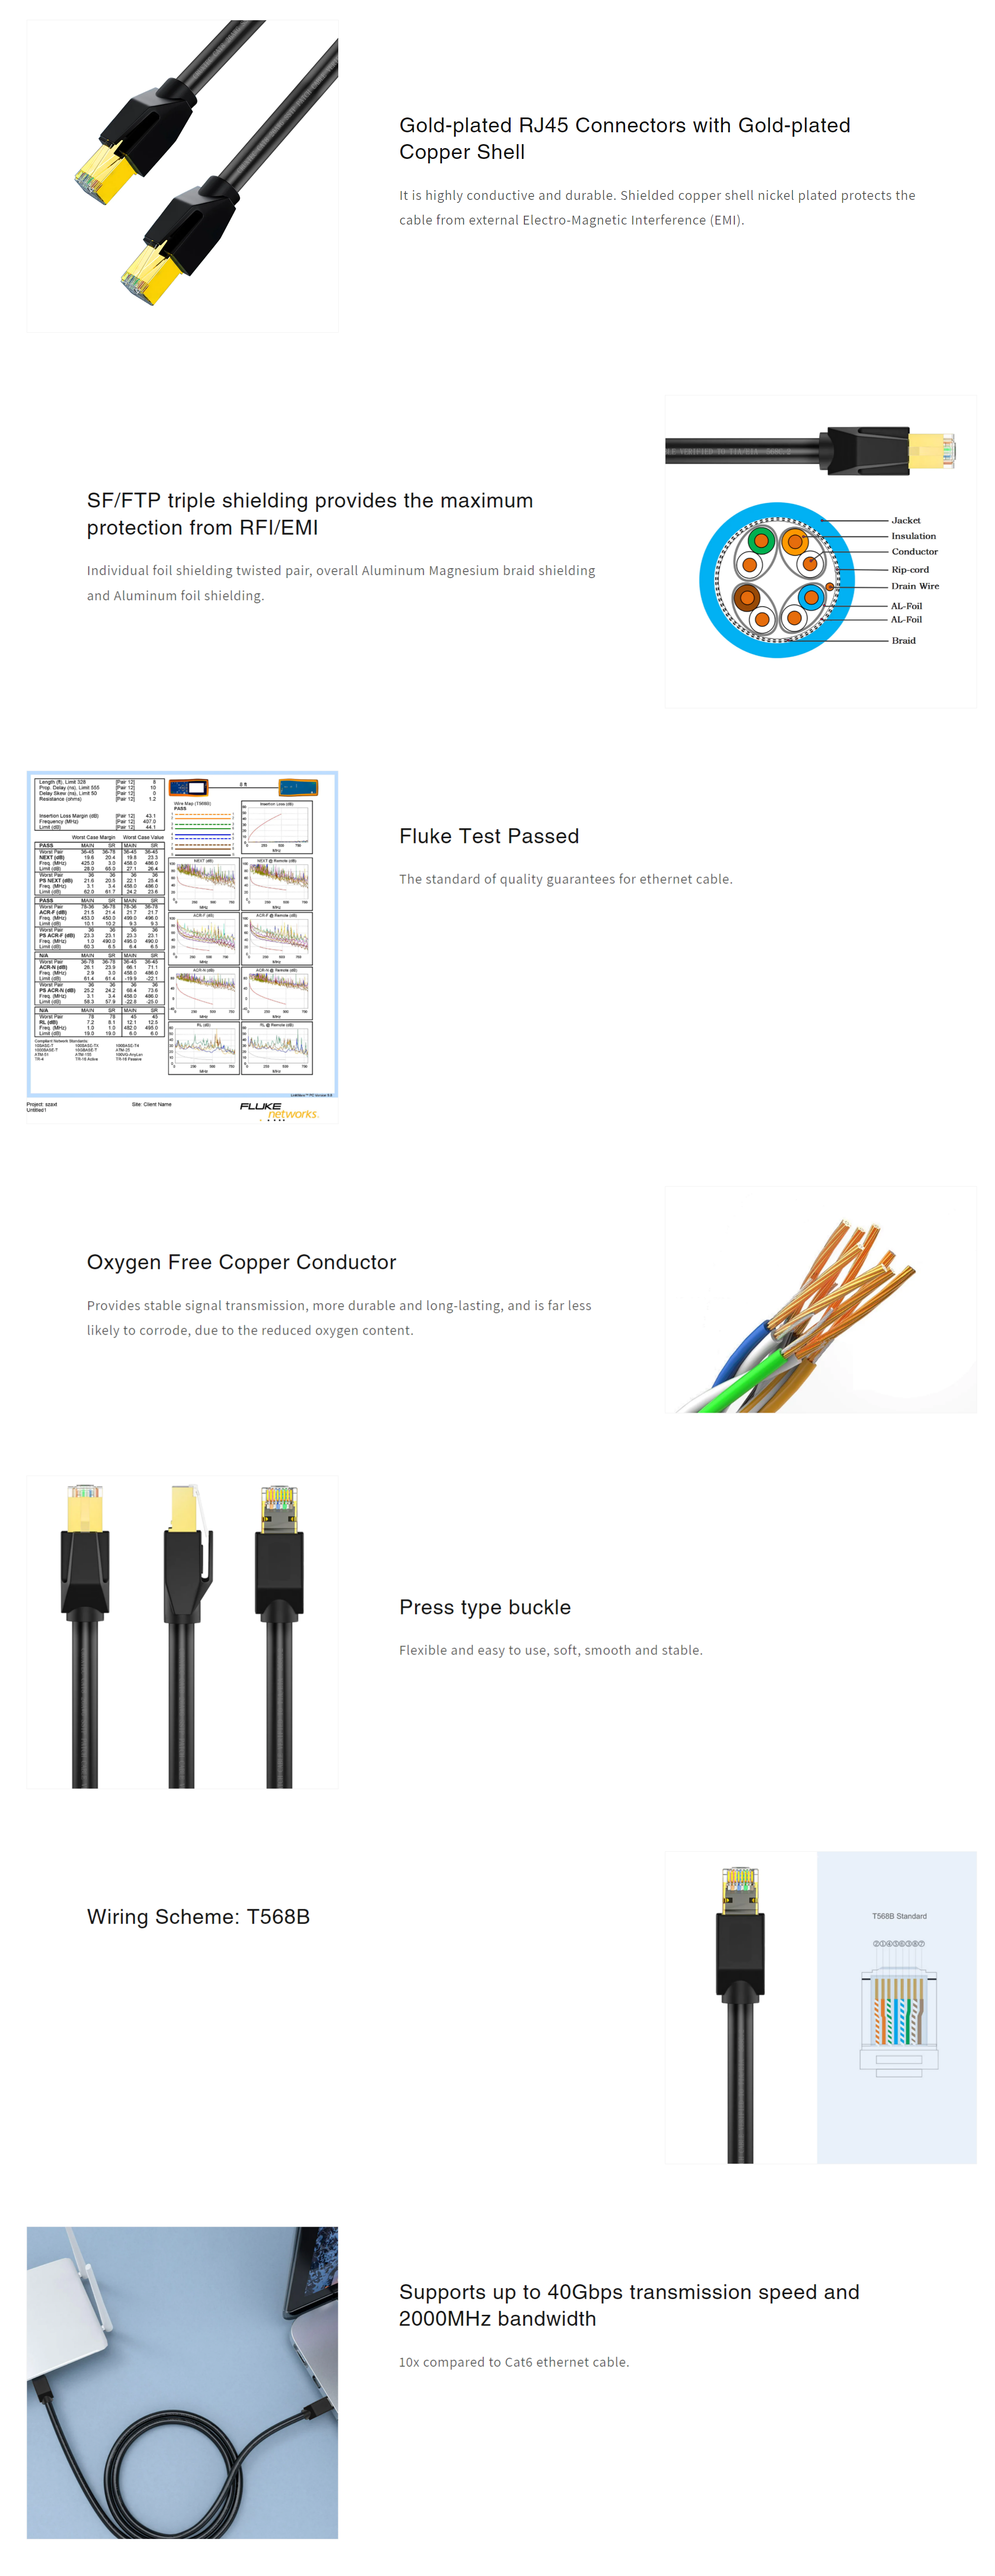 A large marketing image providing additional information about the product Cruxtec CAT8 5m 40GbE SF/FTP Triple Shielding Ethernet Cable Black - Additional alt info not provided